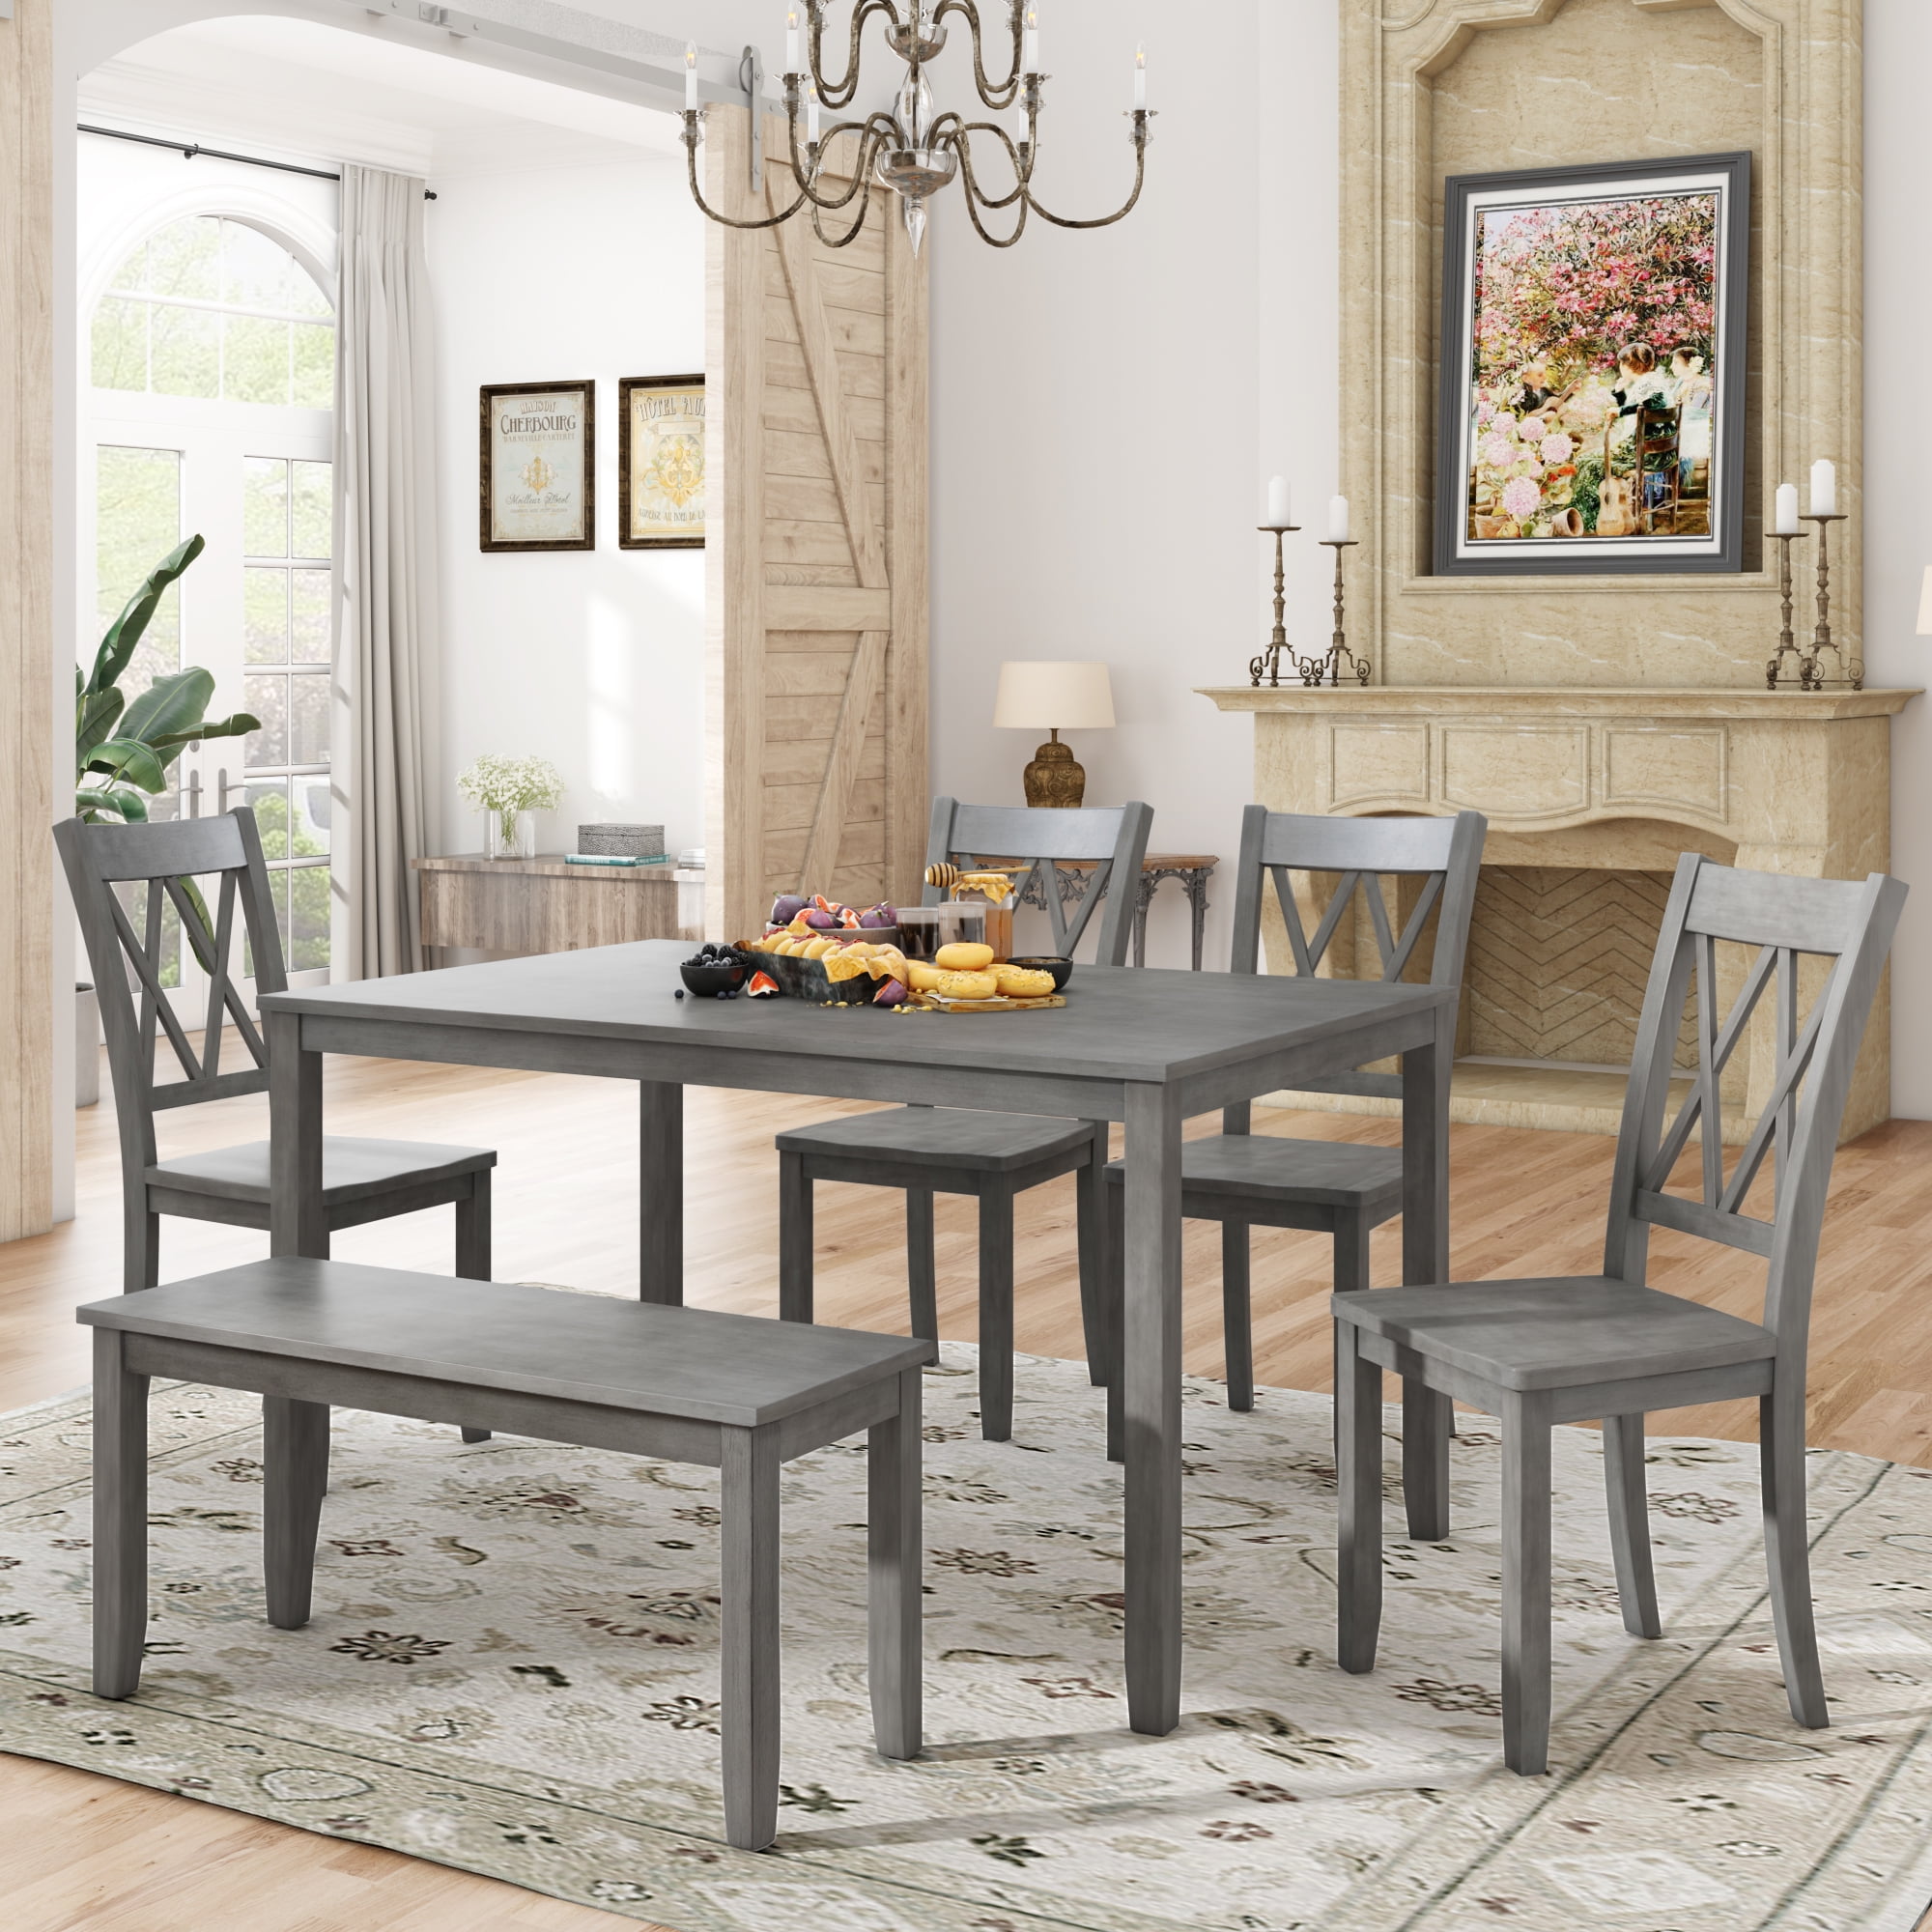 Kitchen Table Set For Dining Room, Gray Dining Room Table Set For 6